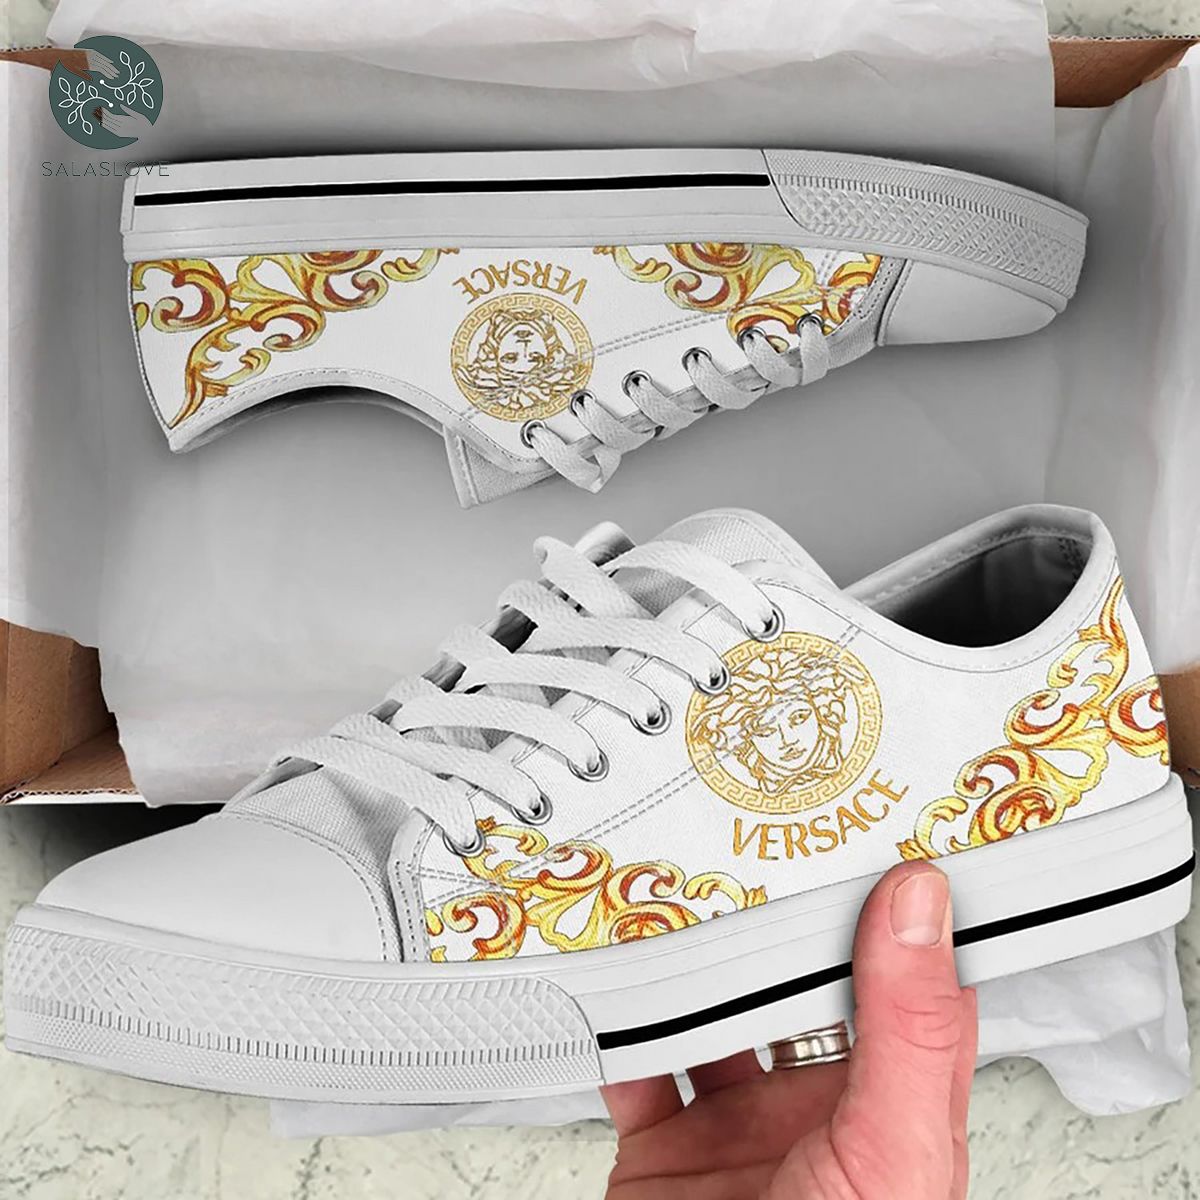 Gianni Versace Gold White Low Top Canvas Shoes Sneakers